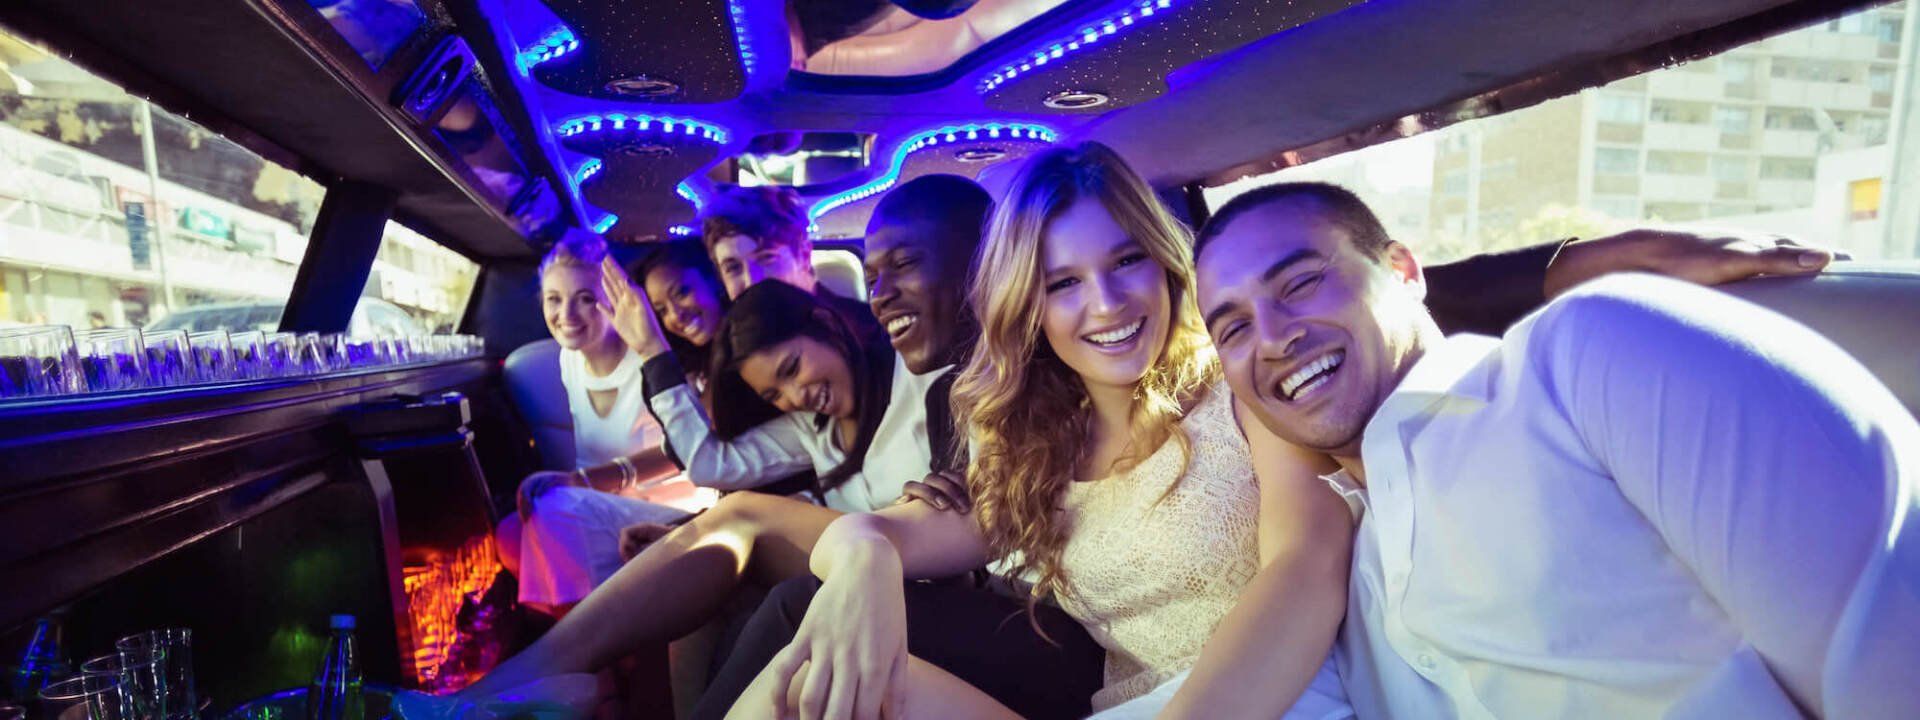 Limo Service in Temecula